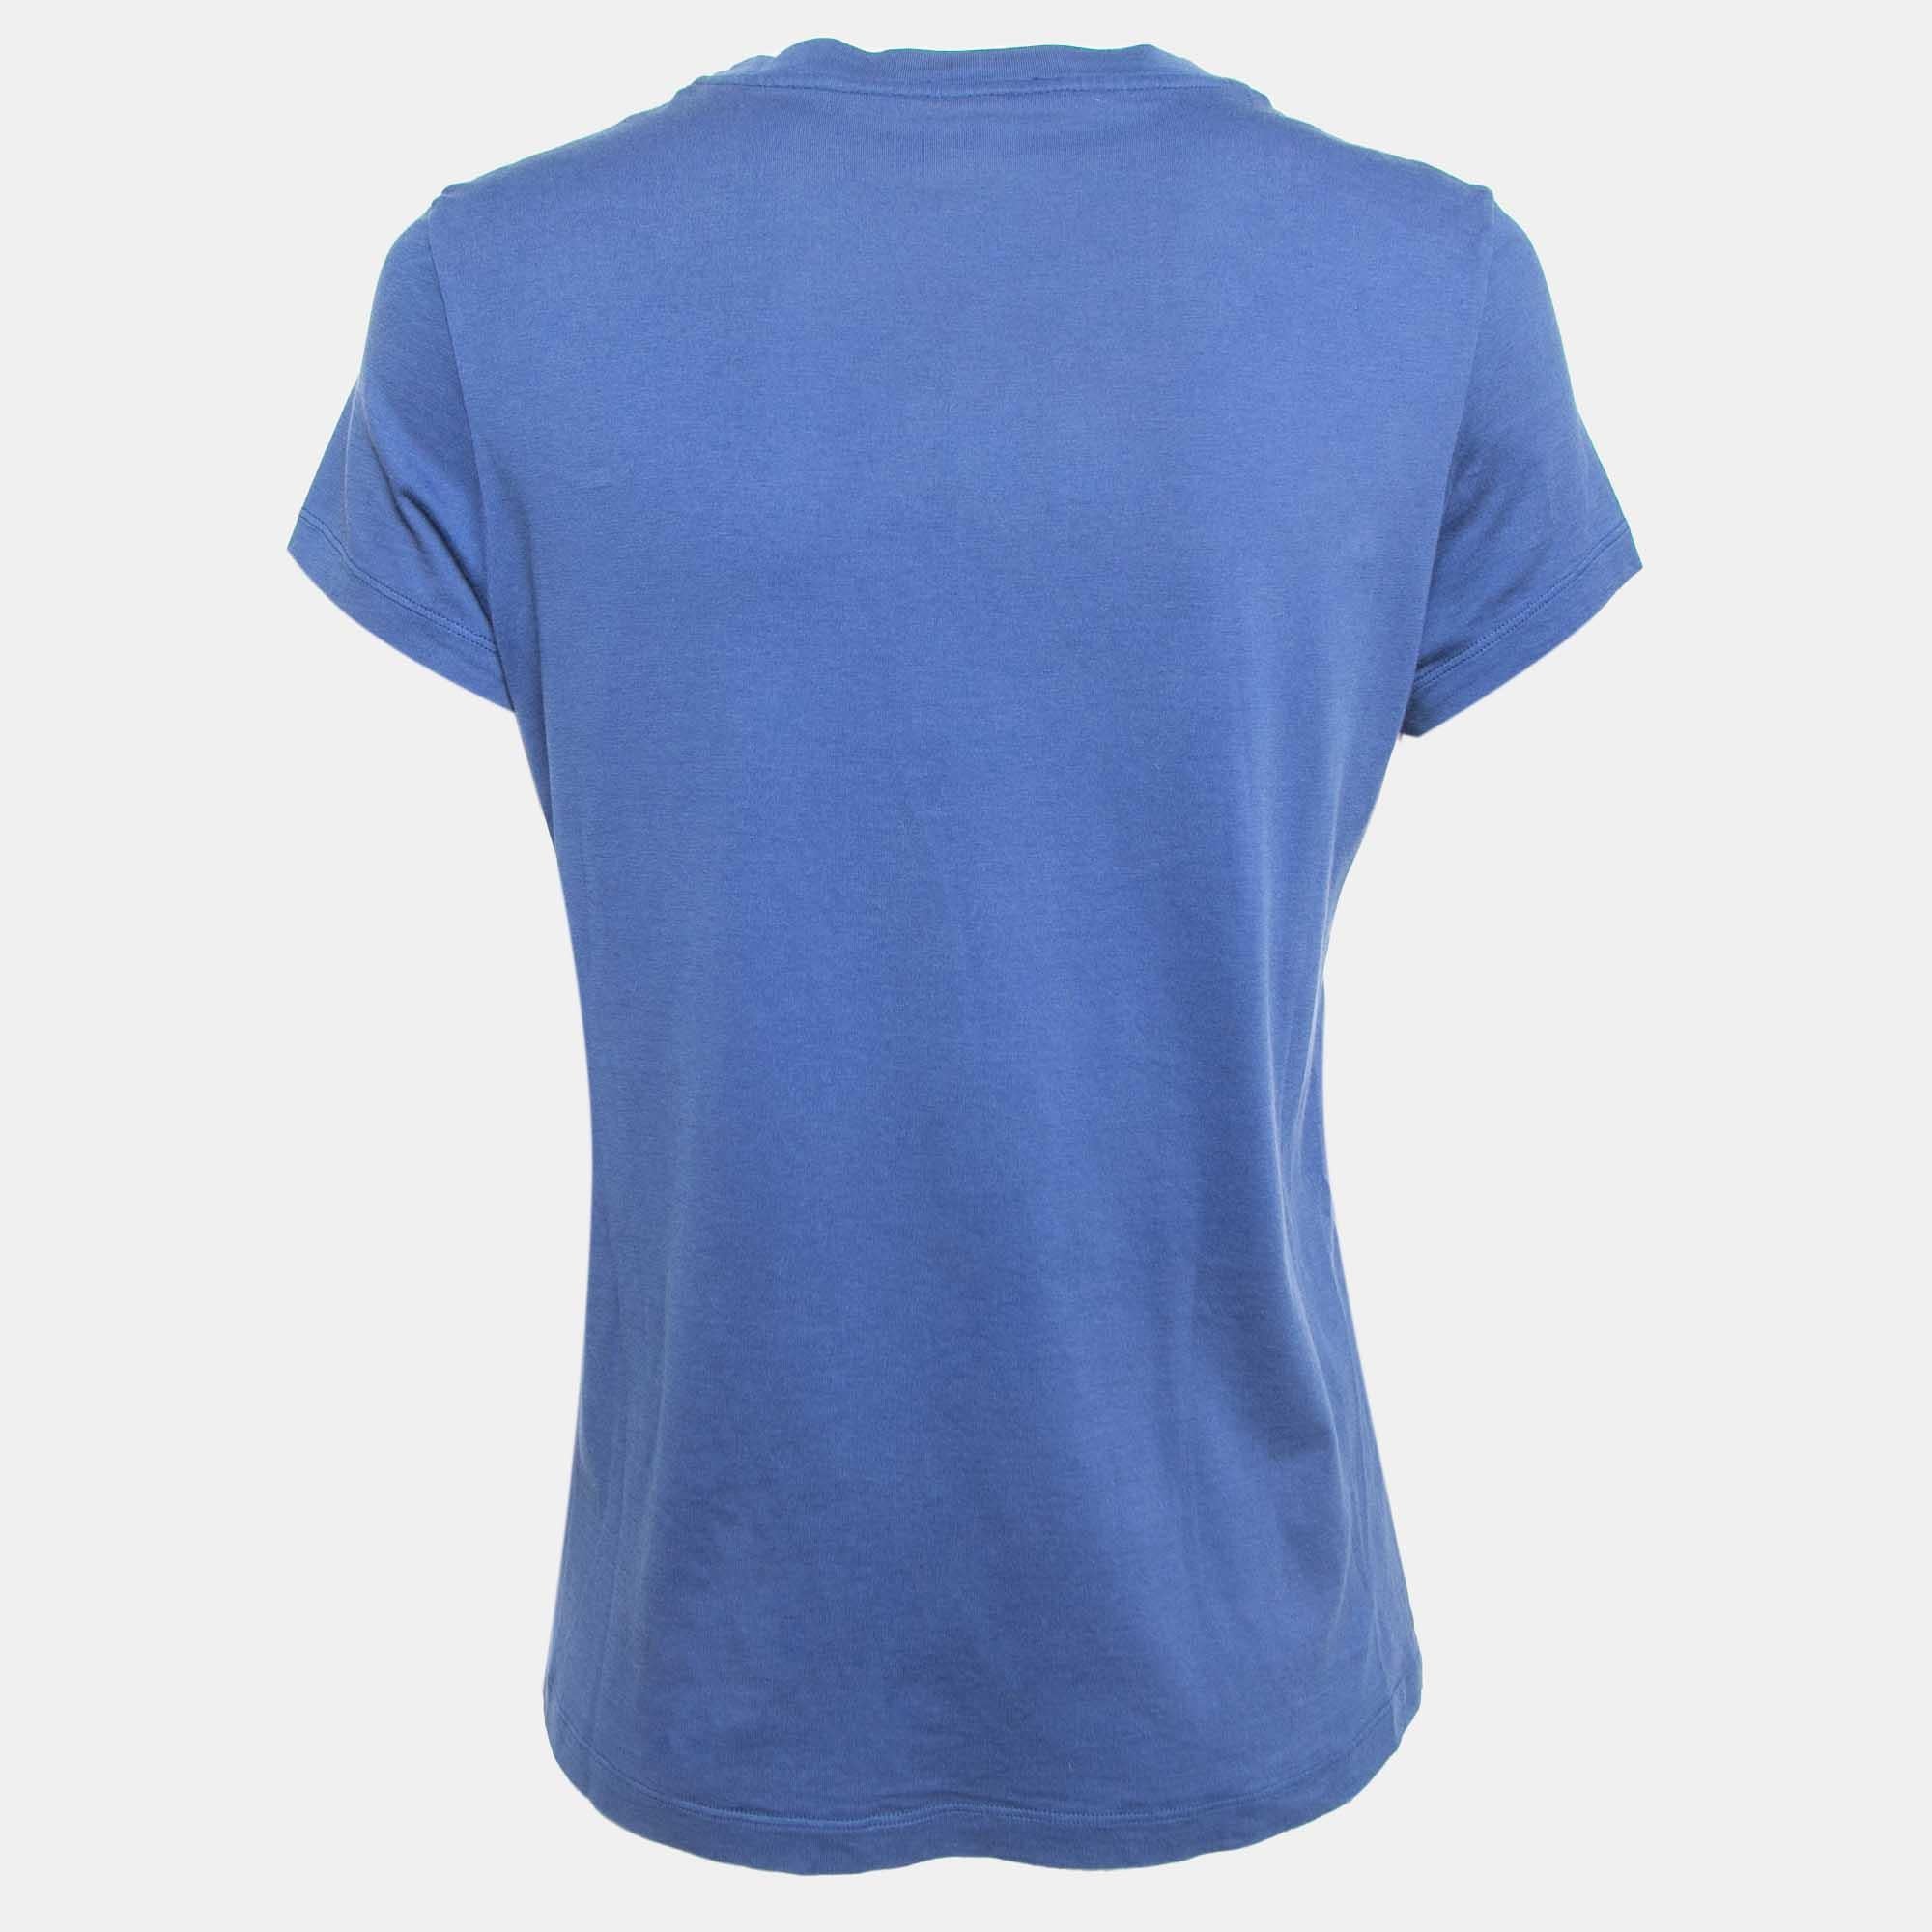 A perfect combination of comfort, luxury, and style, this designer t-shirt is a must-have piece! Made from quality materials, the creation can be styled with denim pants and sneakers for a cool look.

